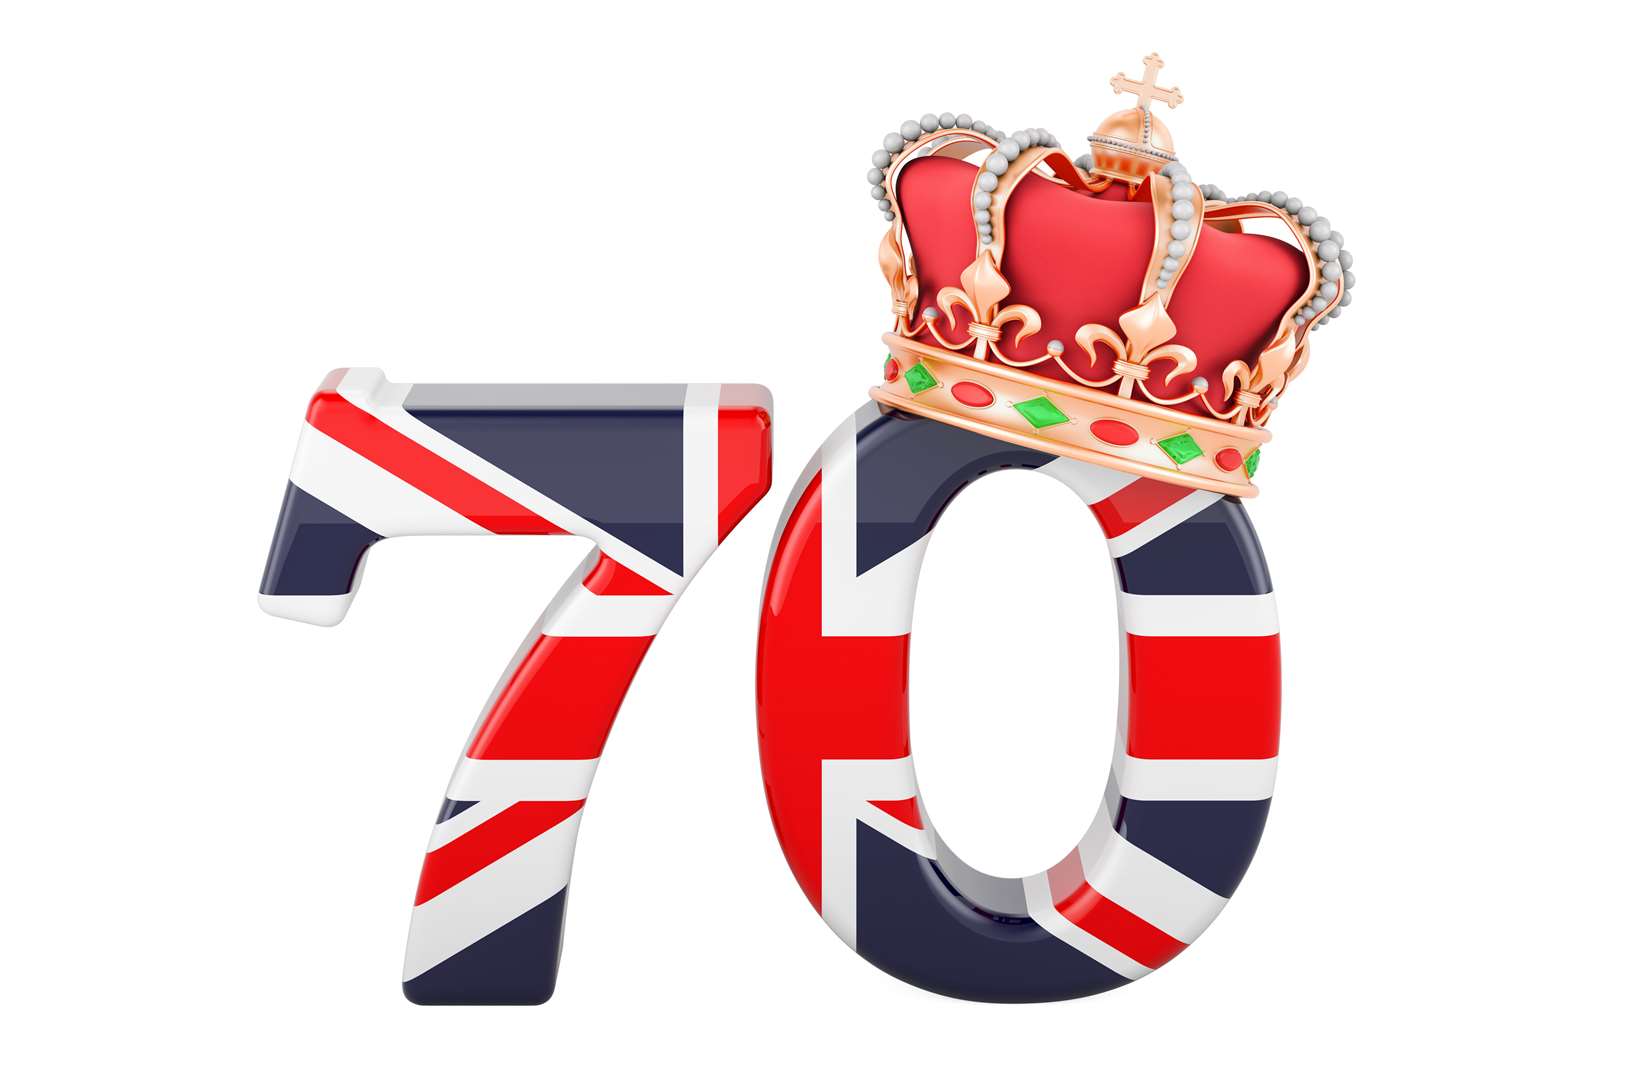 The Platinum Jubilee marks Queen Elizabeth II's 70 years on the throne.